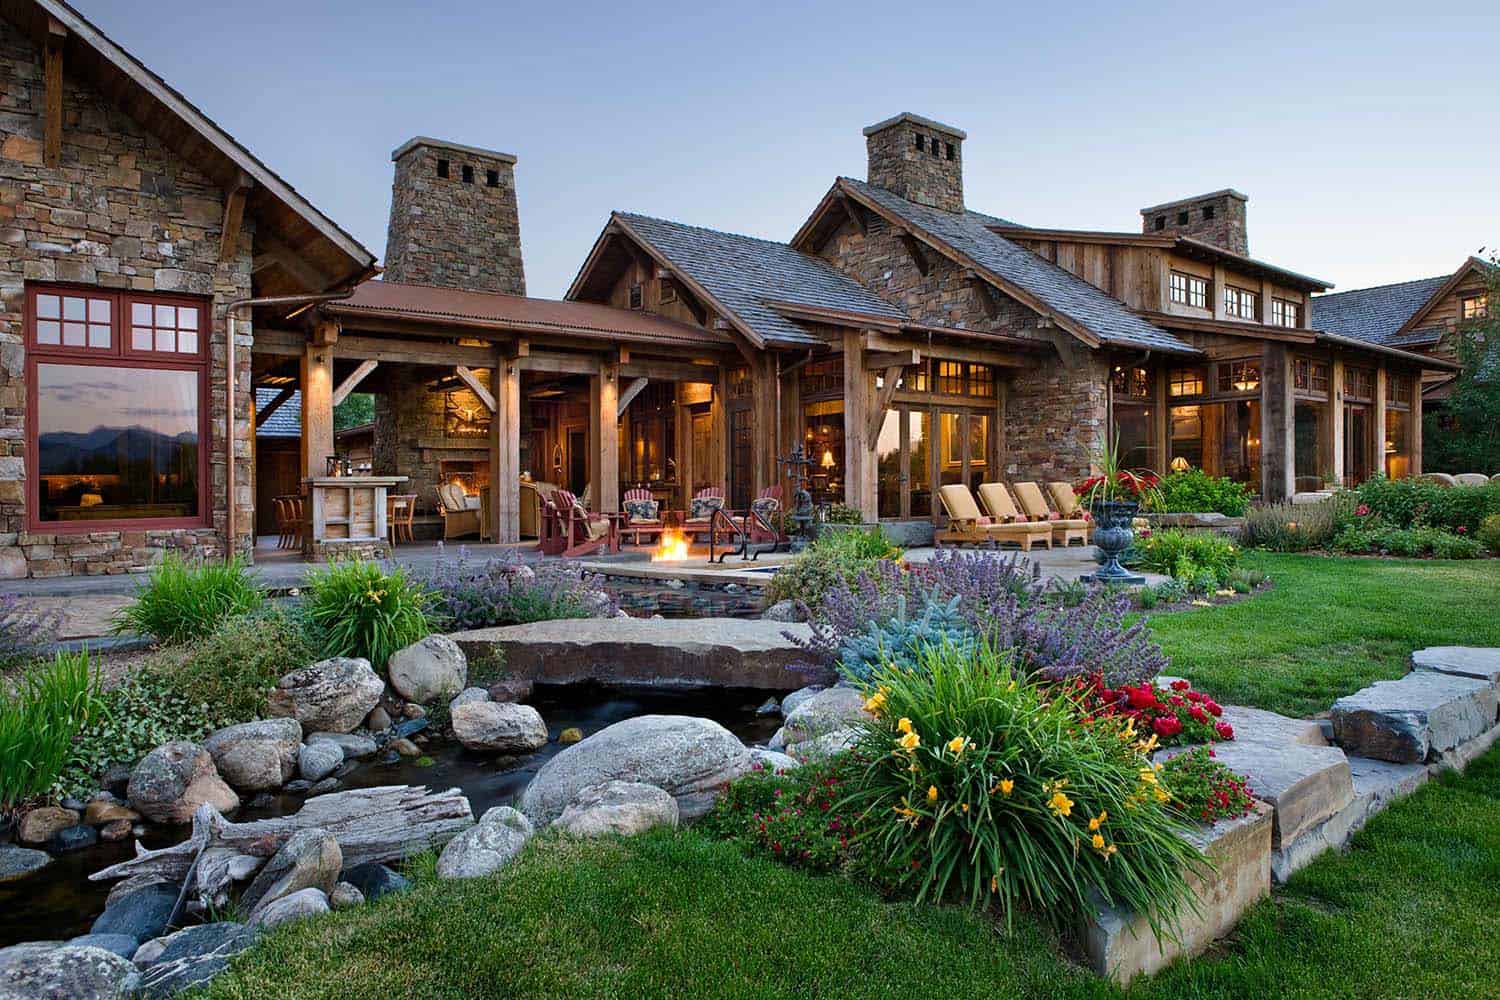 A rustic family compound in the mountains of Montana